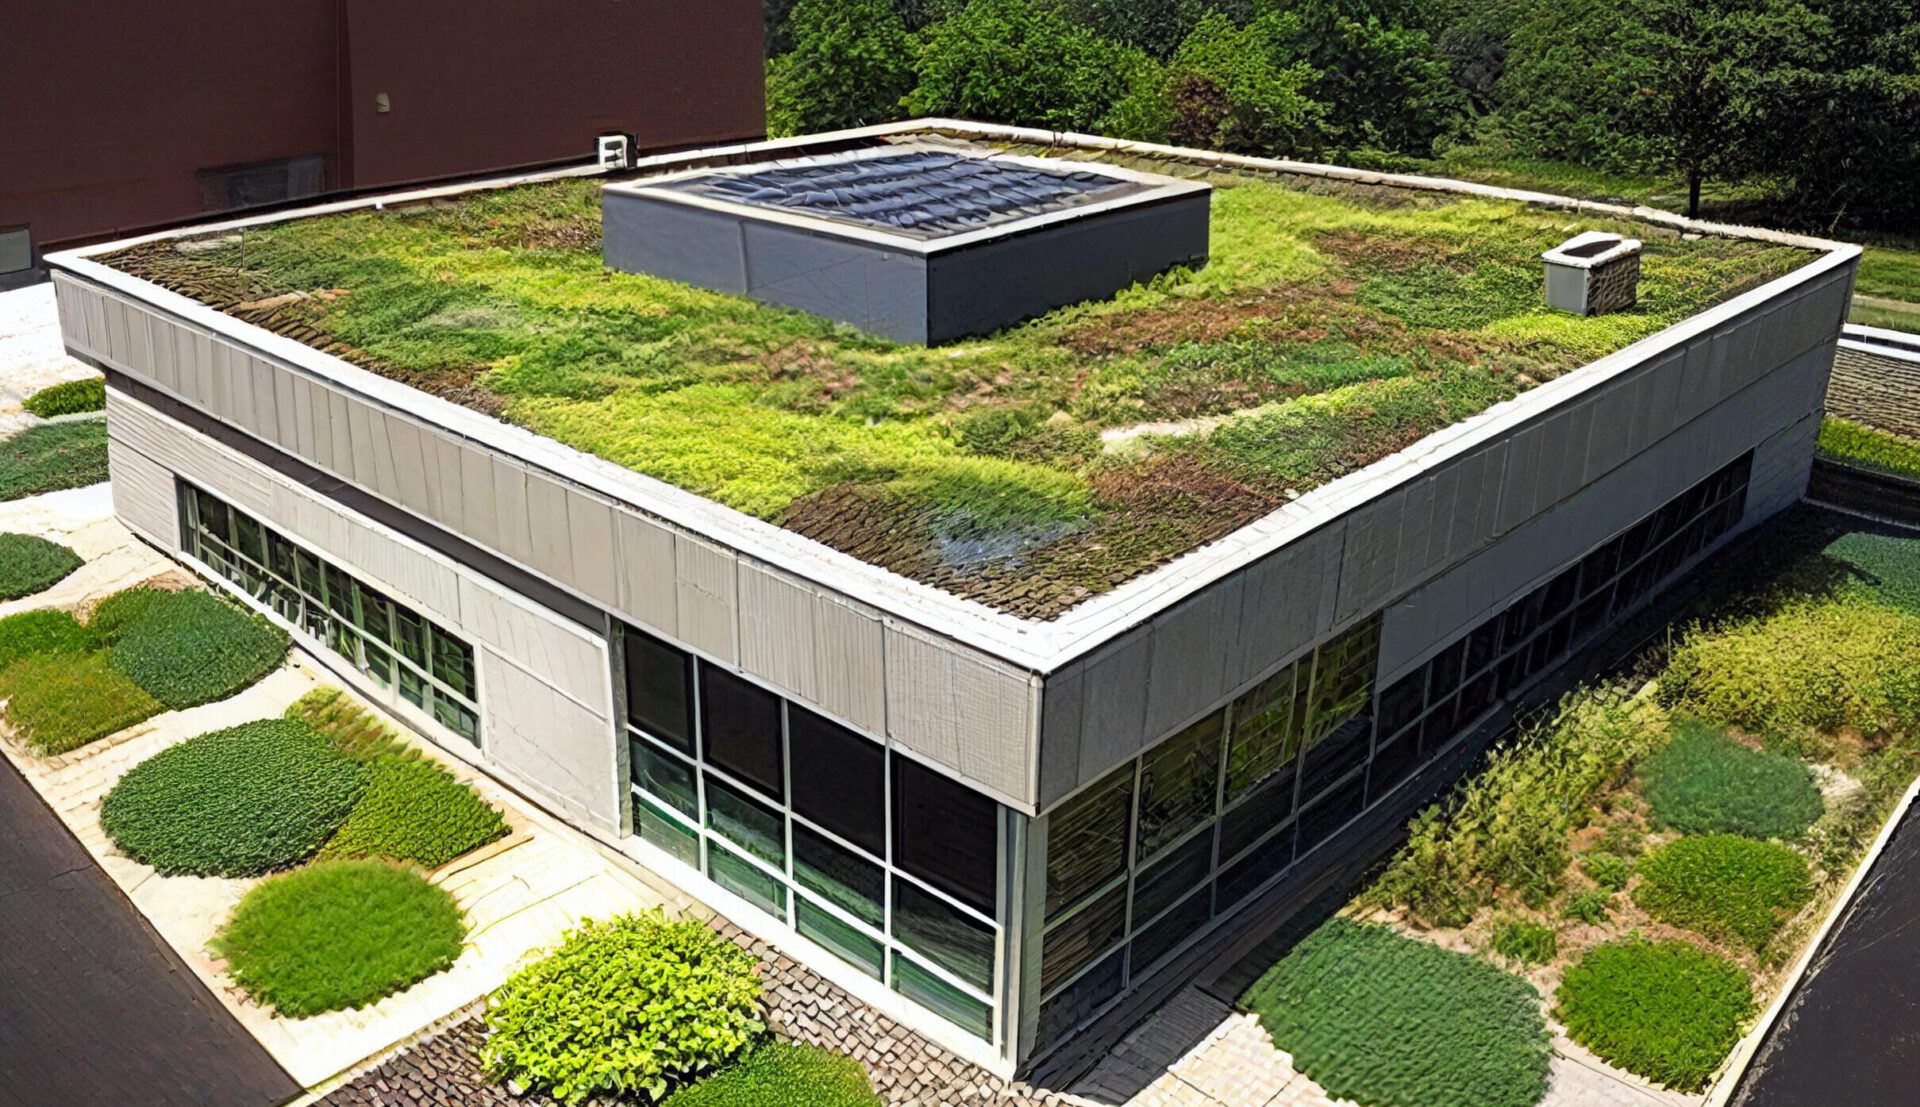 A Corporate Office Building with a Green Roof